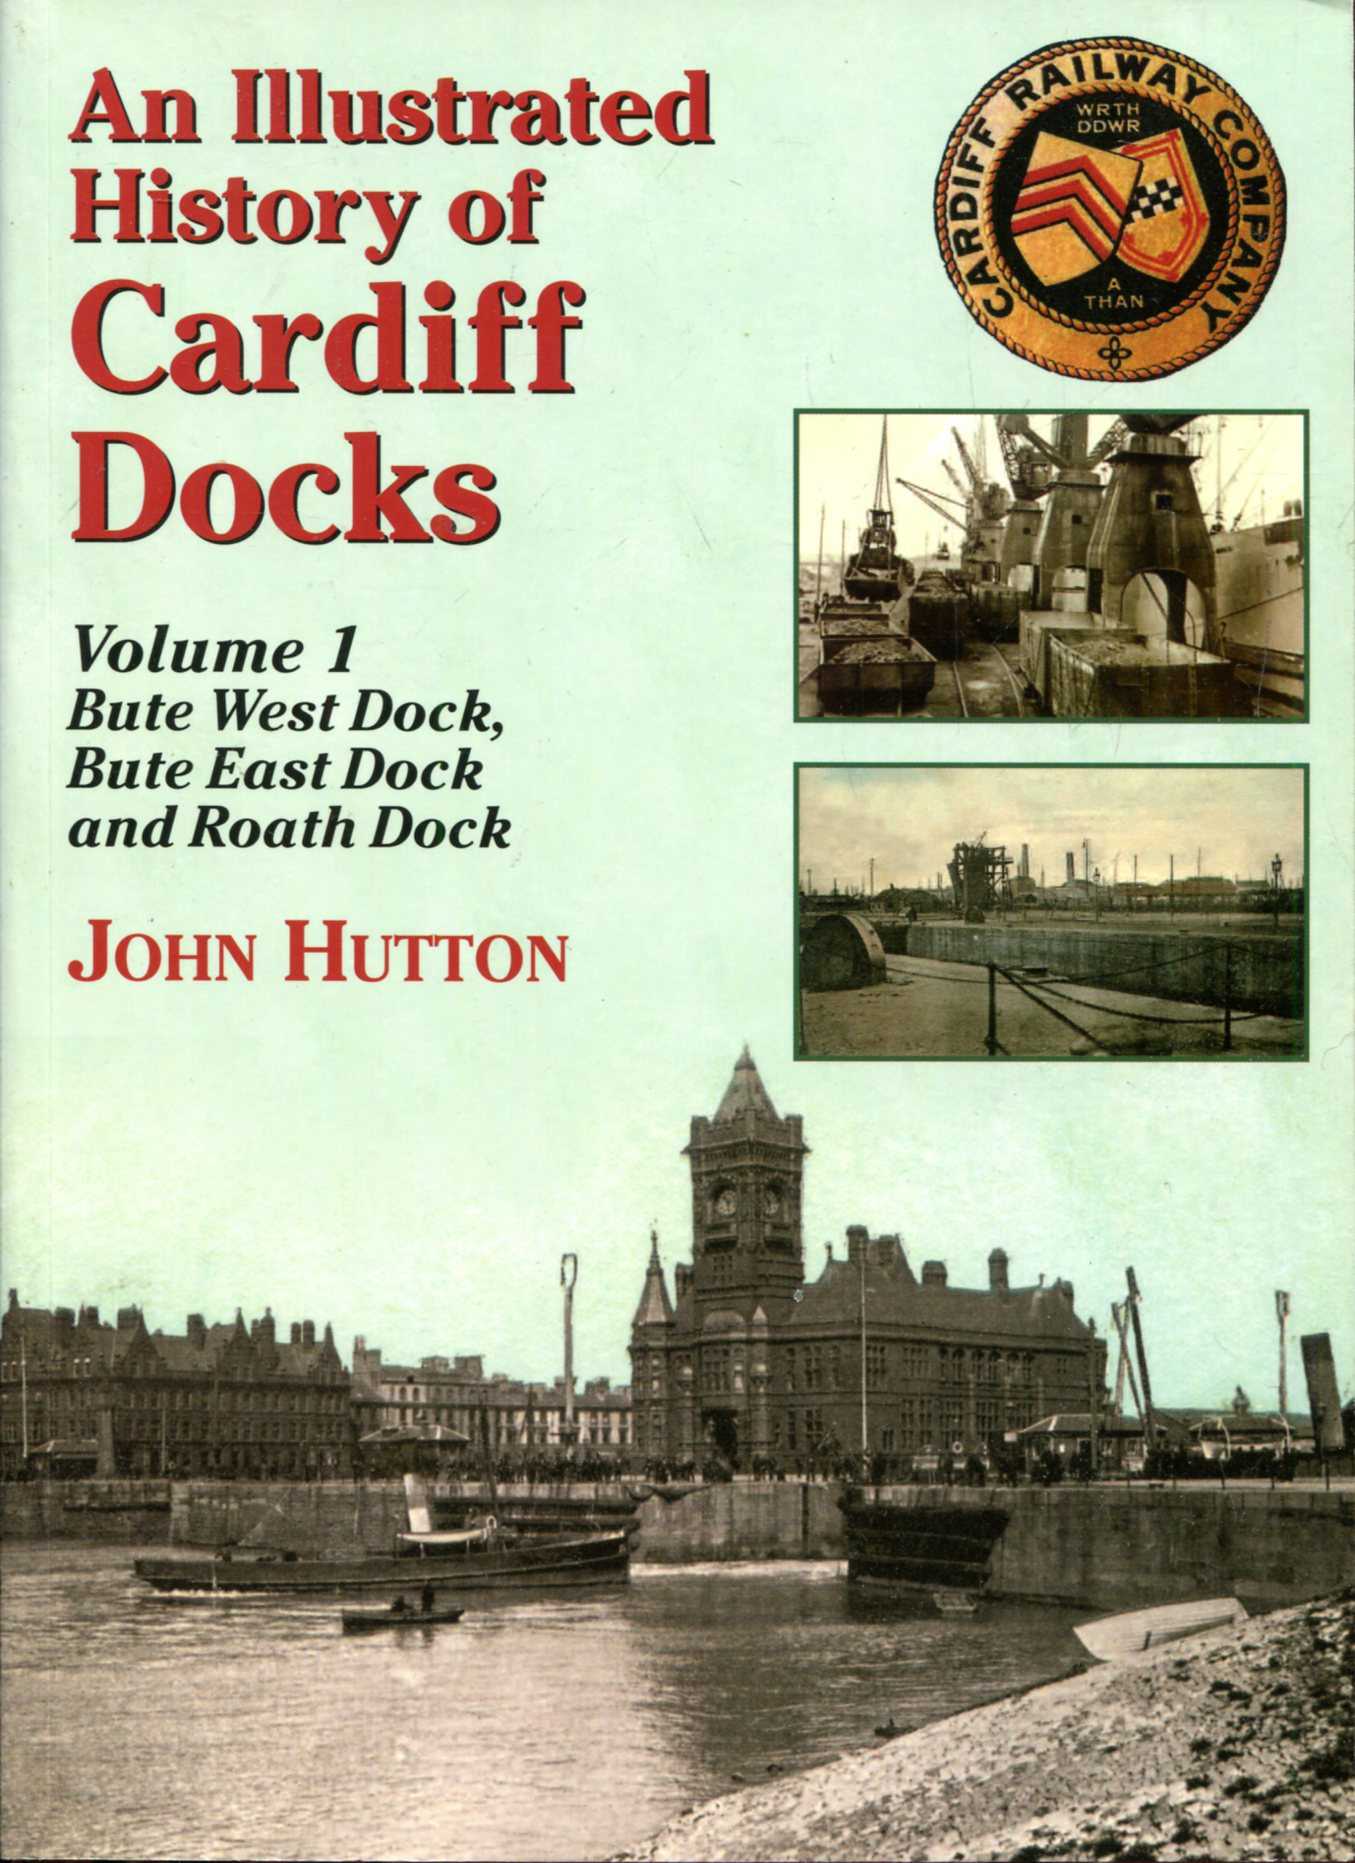 Image for An Illustrated History of Cardiff Docks volume 1 - Bute West Dock, Bute East Dock and Roath Dock